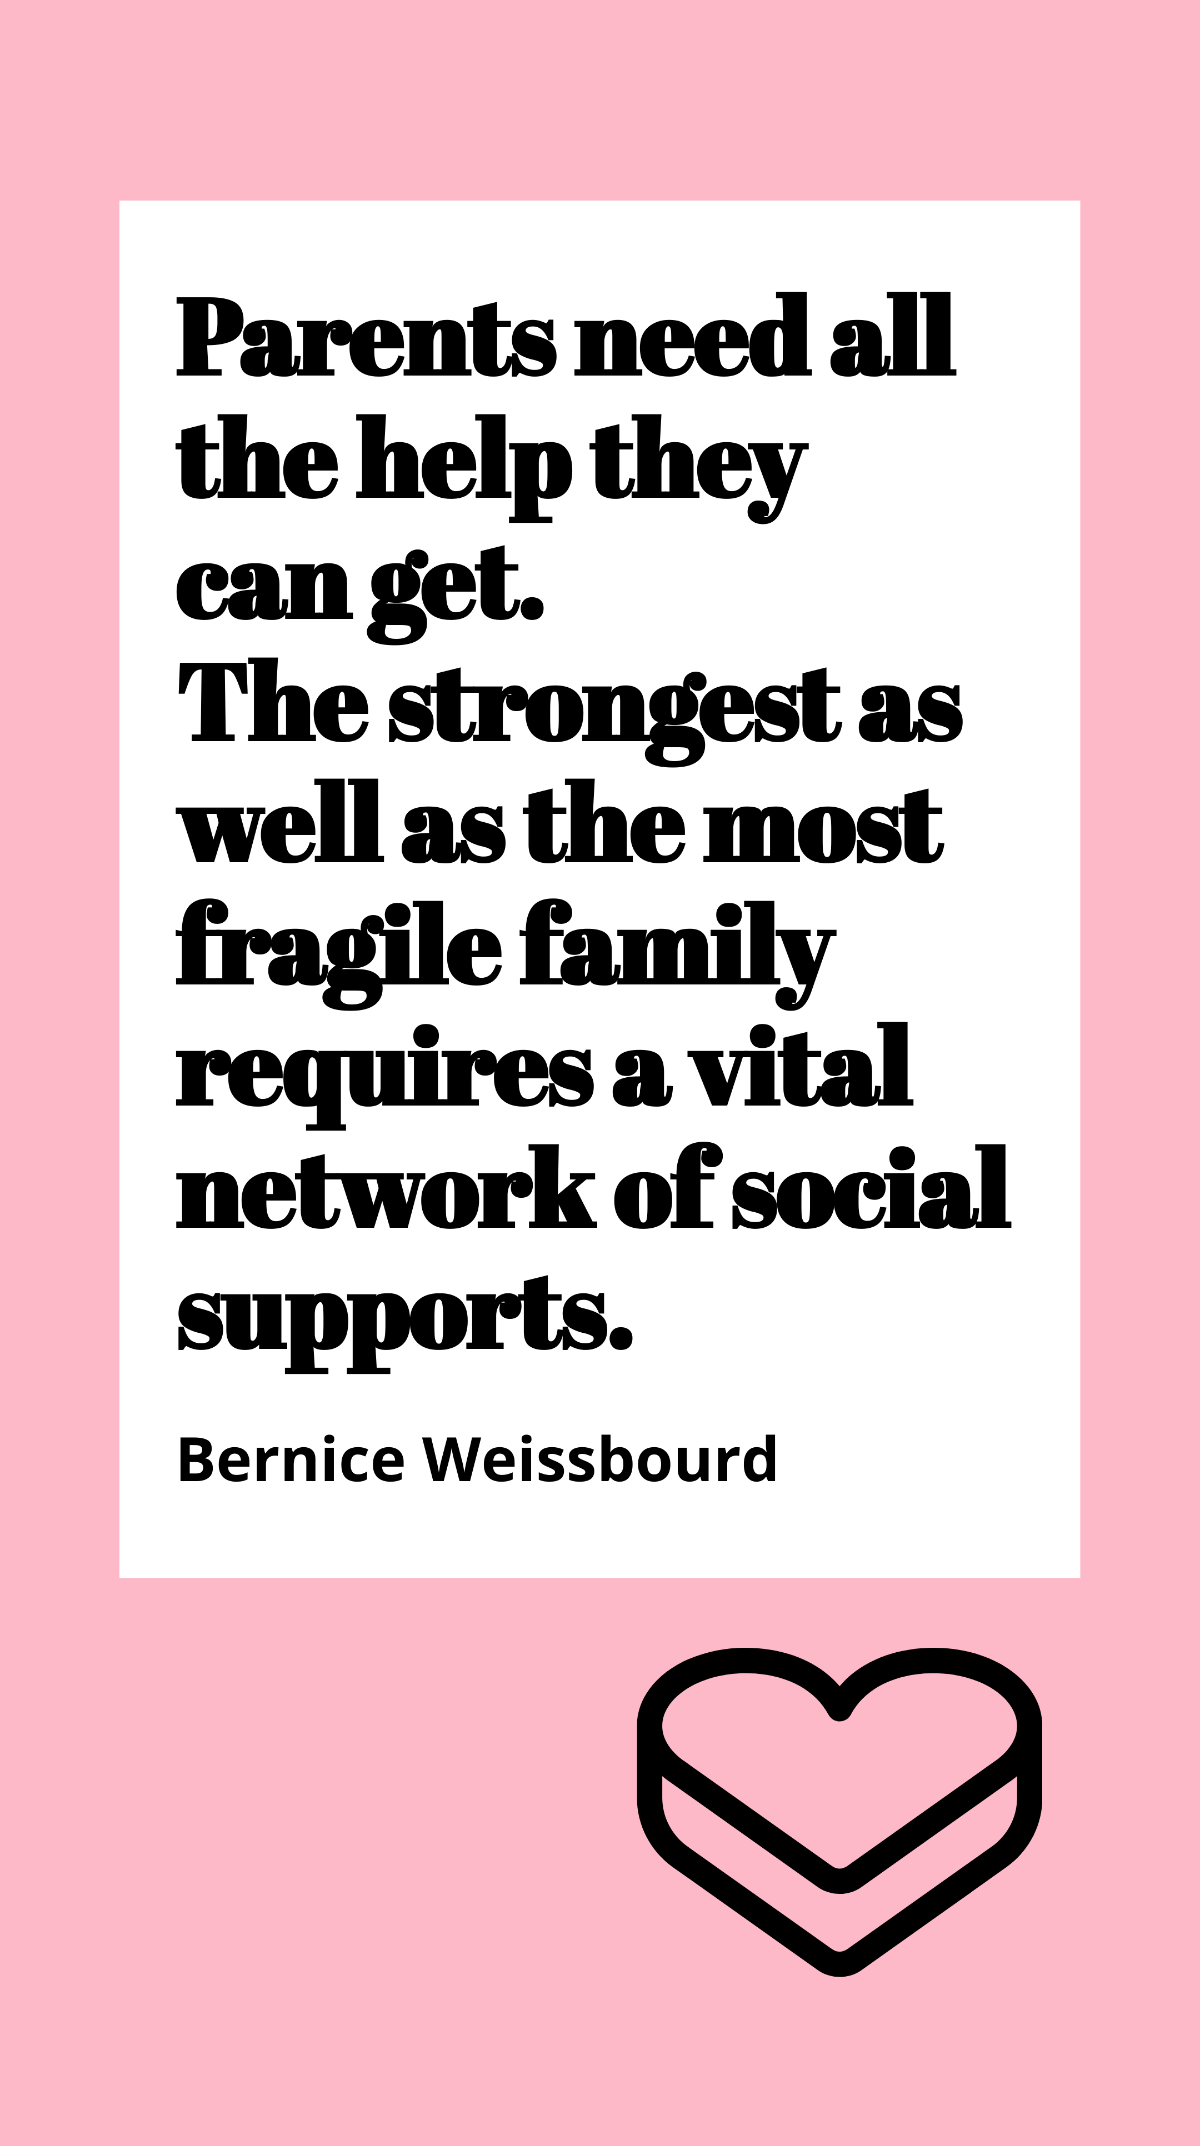 Free Bernice Weissbourd - Parents need all the help they can get. The strongest as well as the most fragile family requires a vital network of social supports. Template